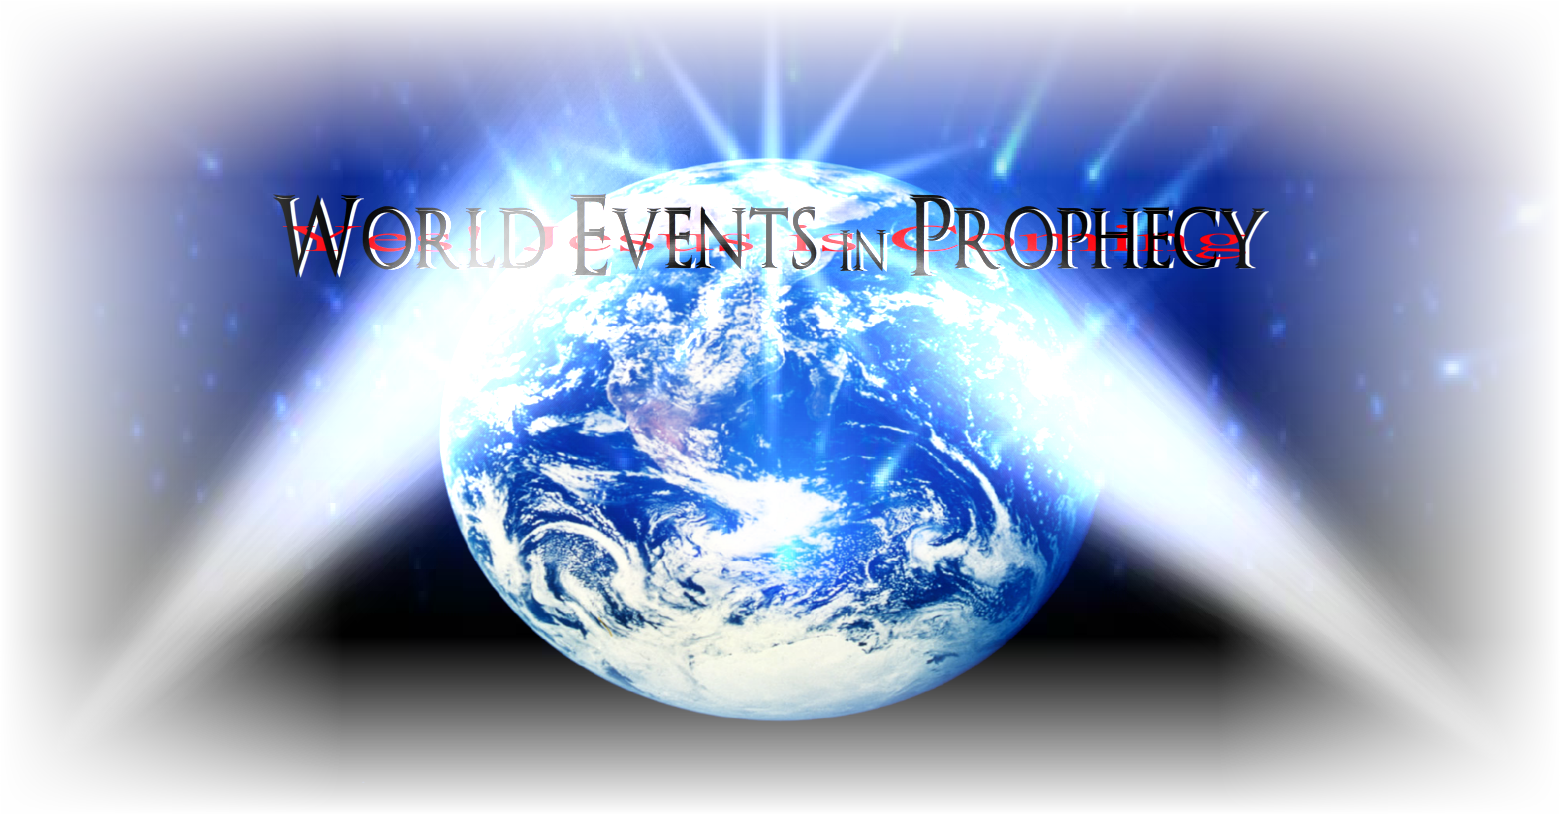 World Events in Prophecy